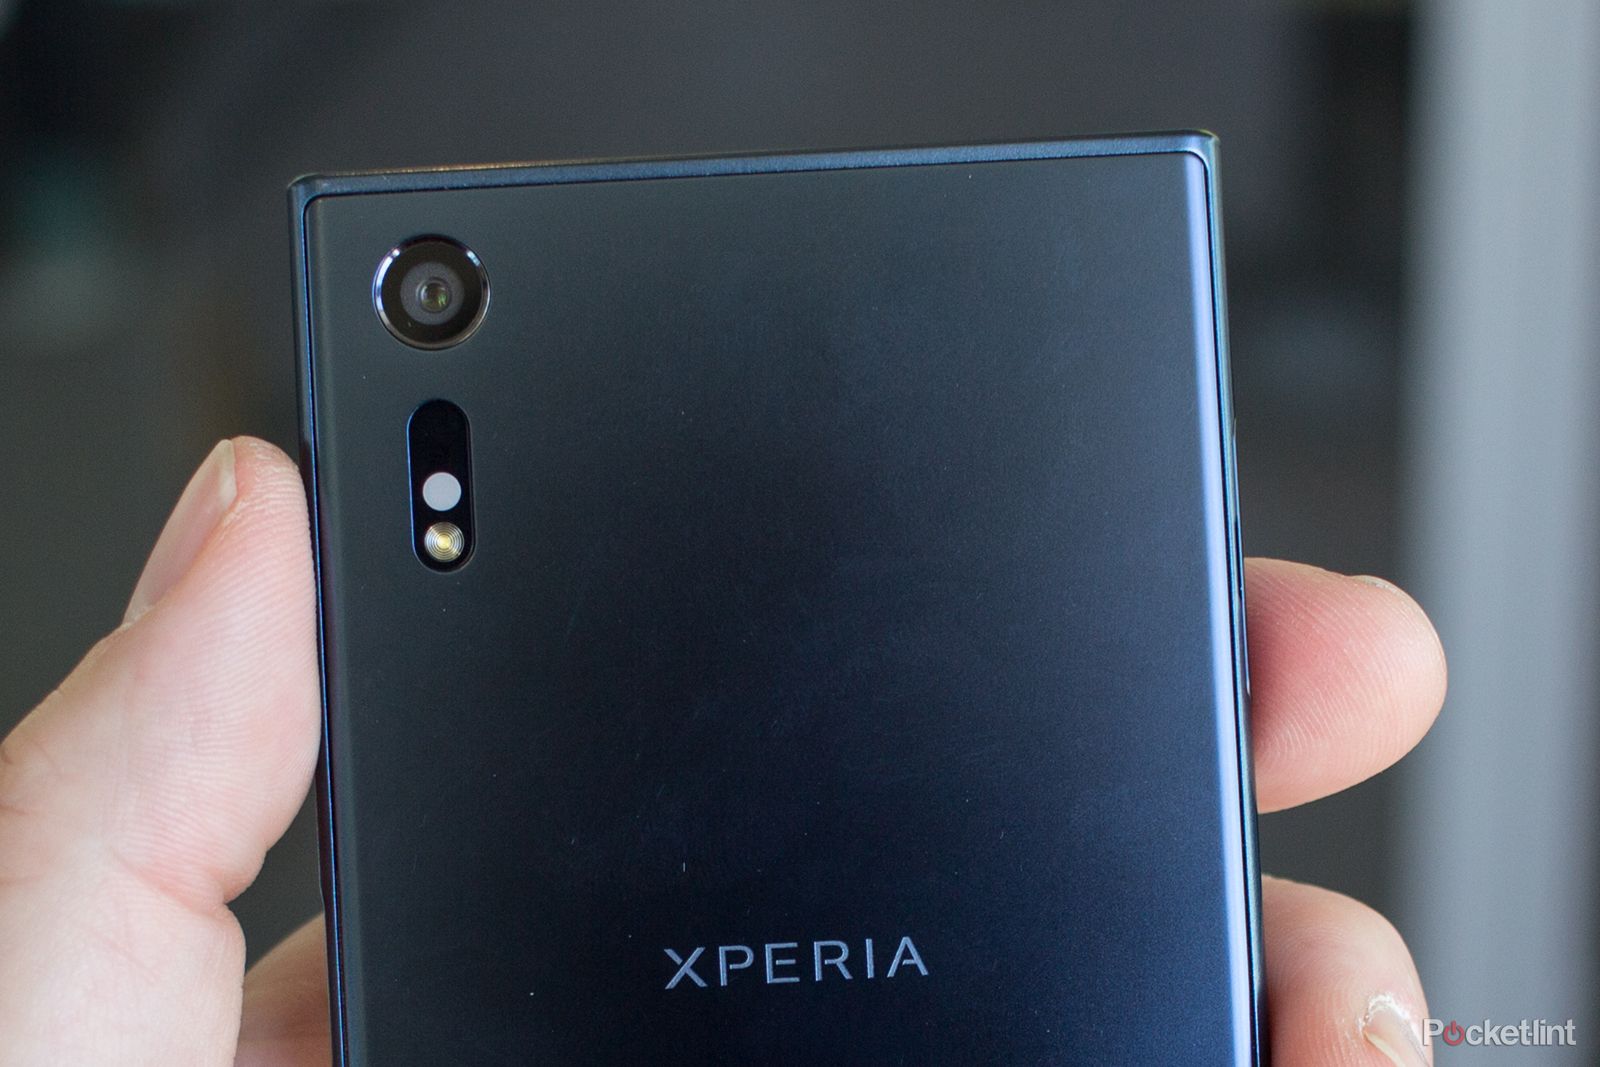 sony s 1 000fps camera touted for new xperia xzs and xz premium smartphones image 1